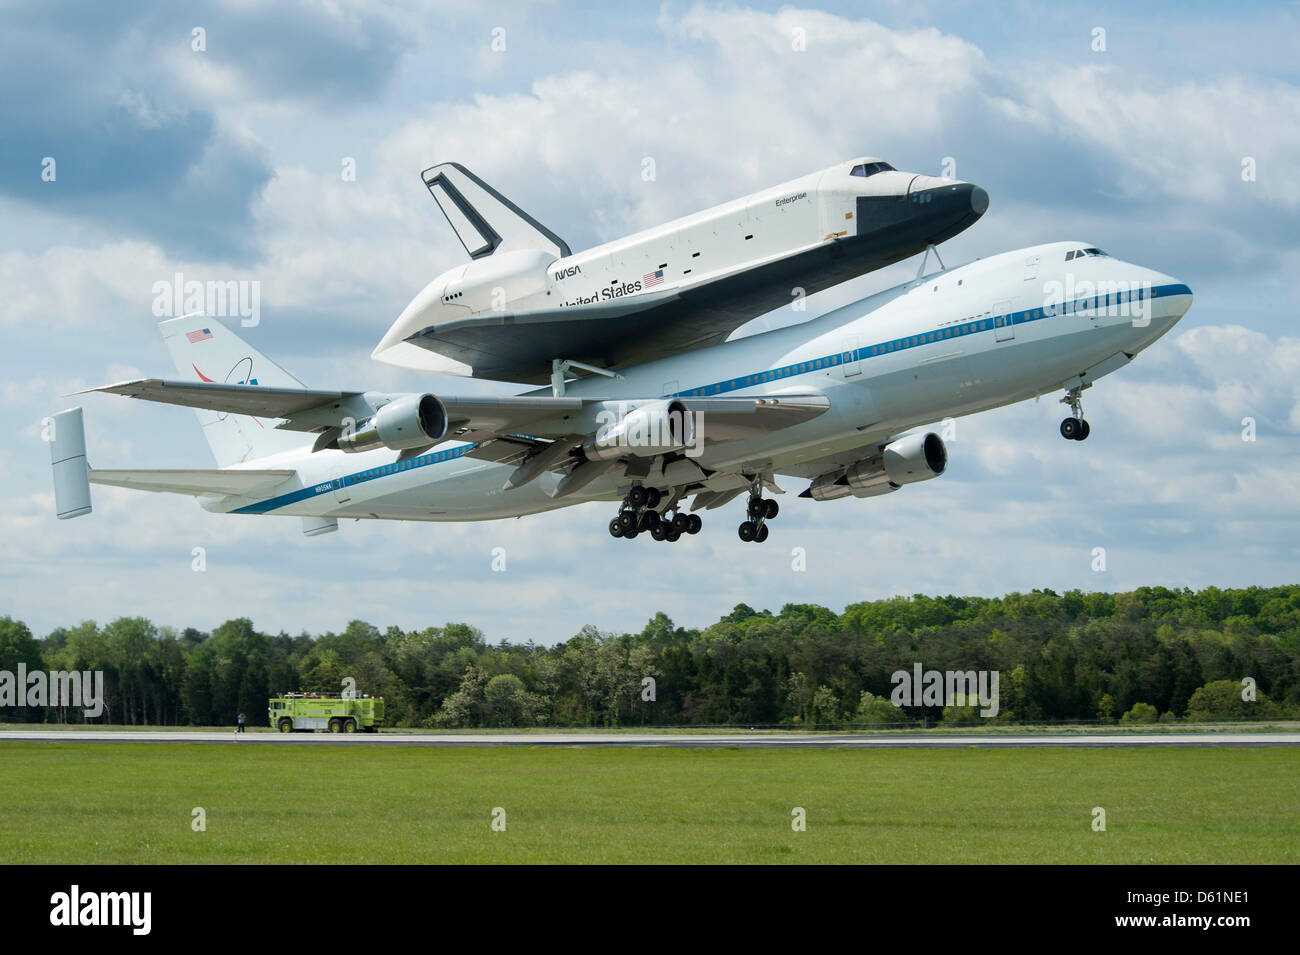 Space shuttle Enterprise, mounted atop a NASA 747 Shuttle Carrier Aircraft (SCA), is seen as it takes off for New York from Washington Dulles International Airport, Friday, April 27, 2012, in Sterling, Virginia. Enterprise was the first shuttle orbiter built for NASA performing test flights in the atmosphere and was incapable of spaceflight. Originally housed at the Smithsonian's S Stock Photo